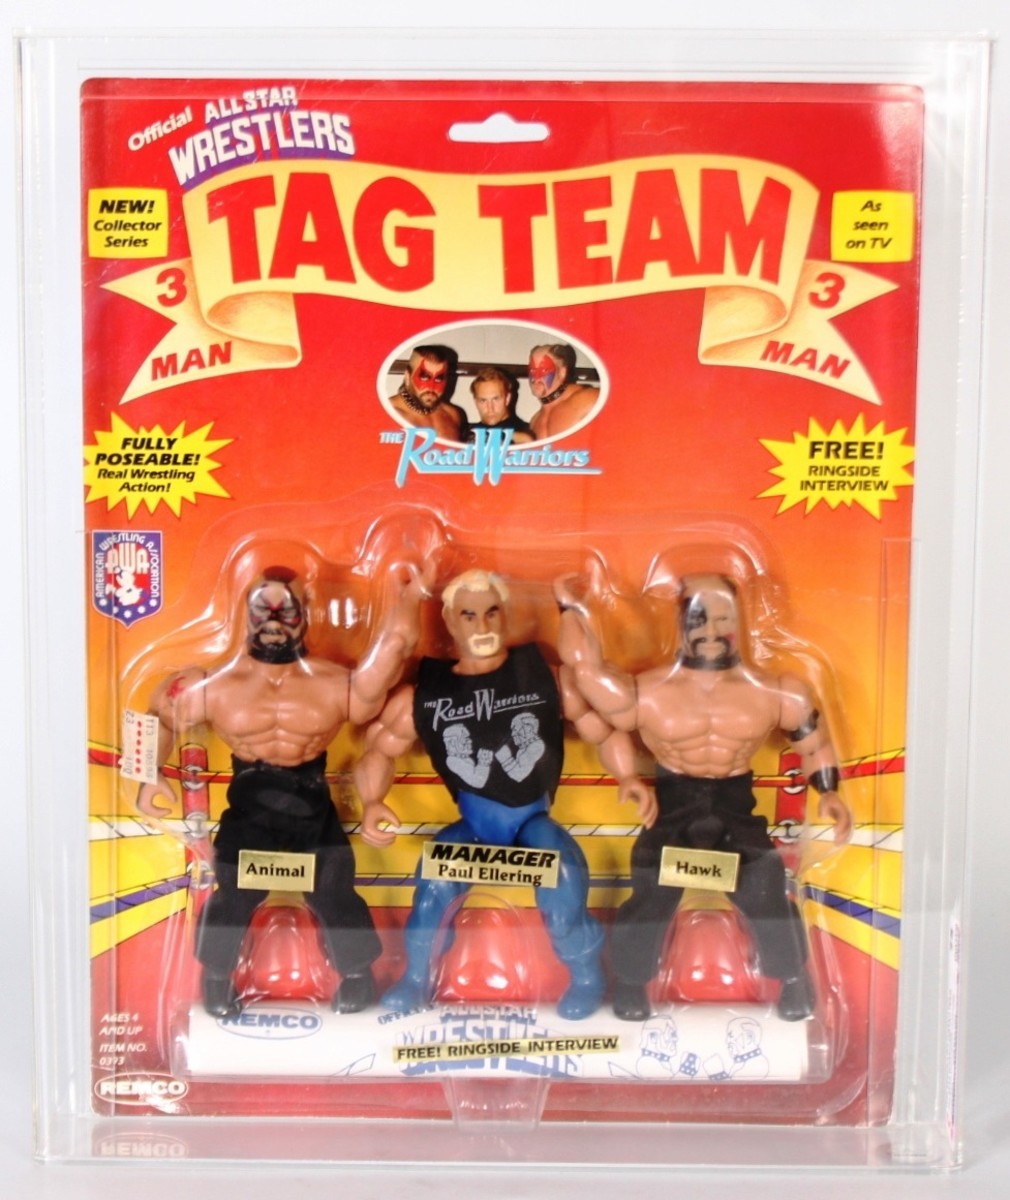 Action figures of wrestling tag team the Road Warriors